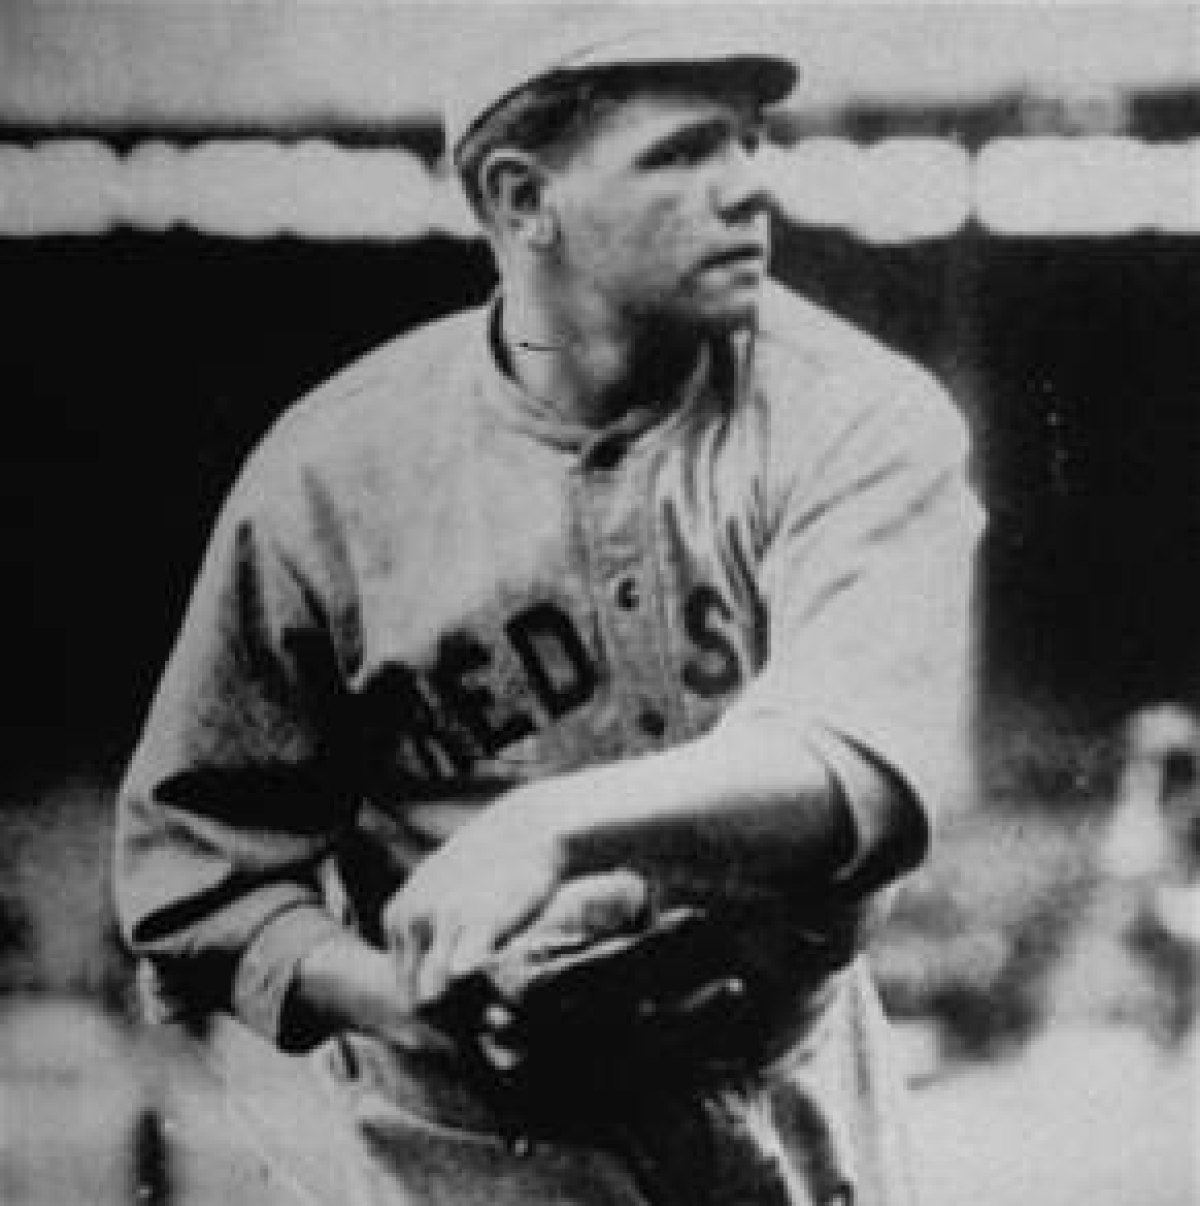 Babe Ruth throwing with the Red Sox in 1916.